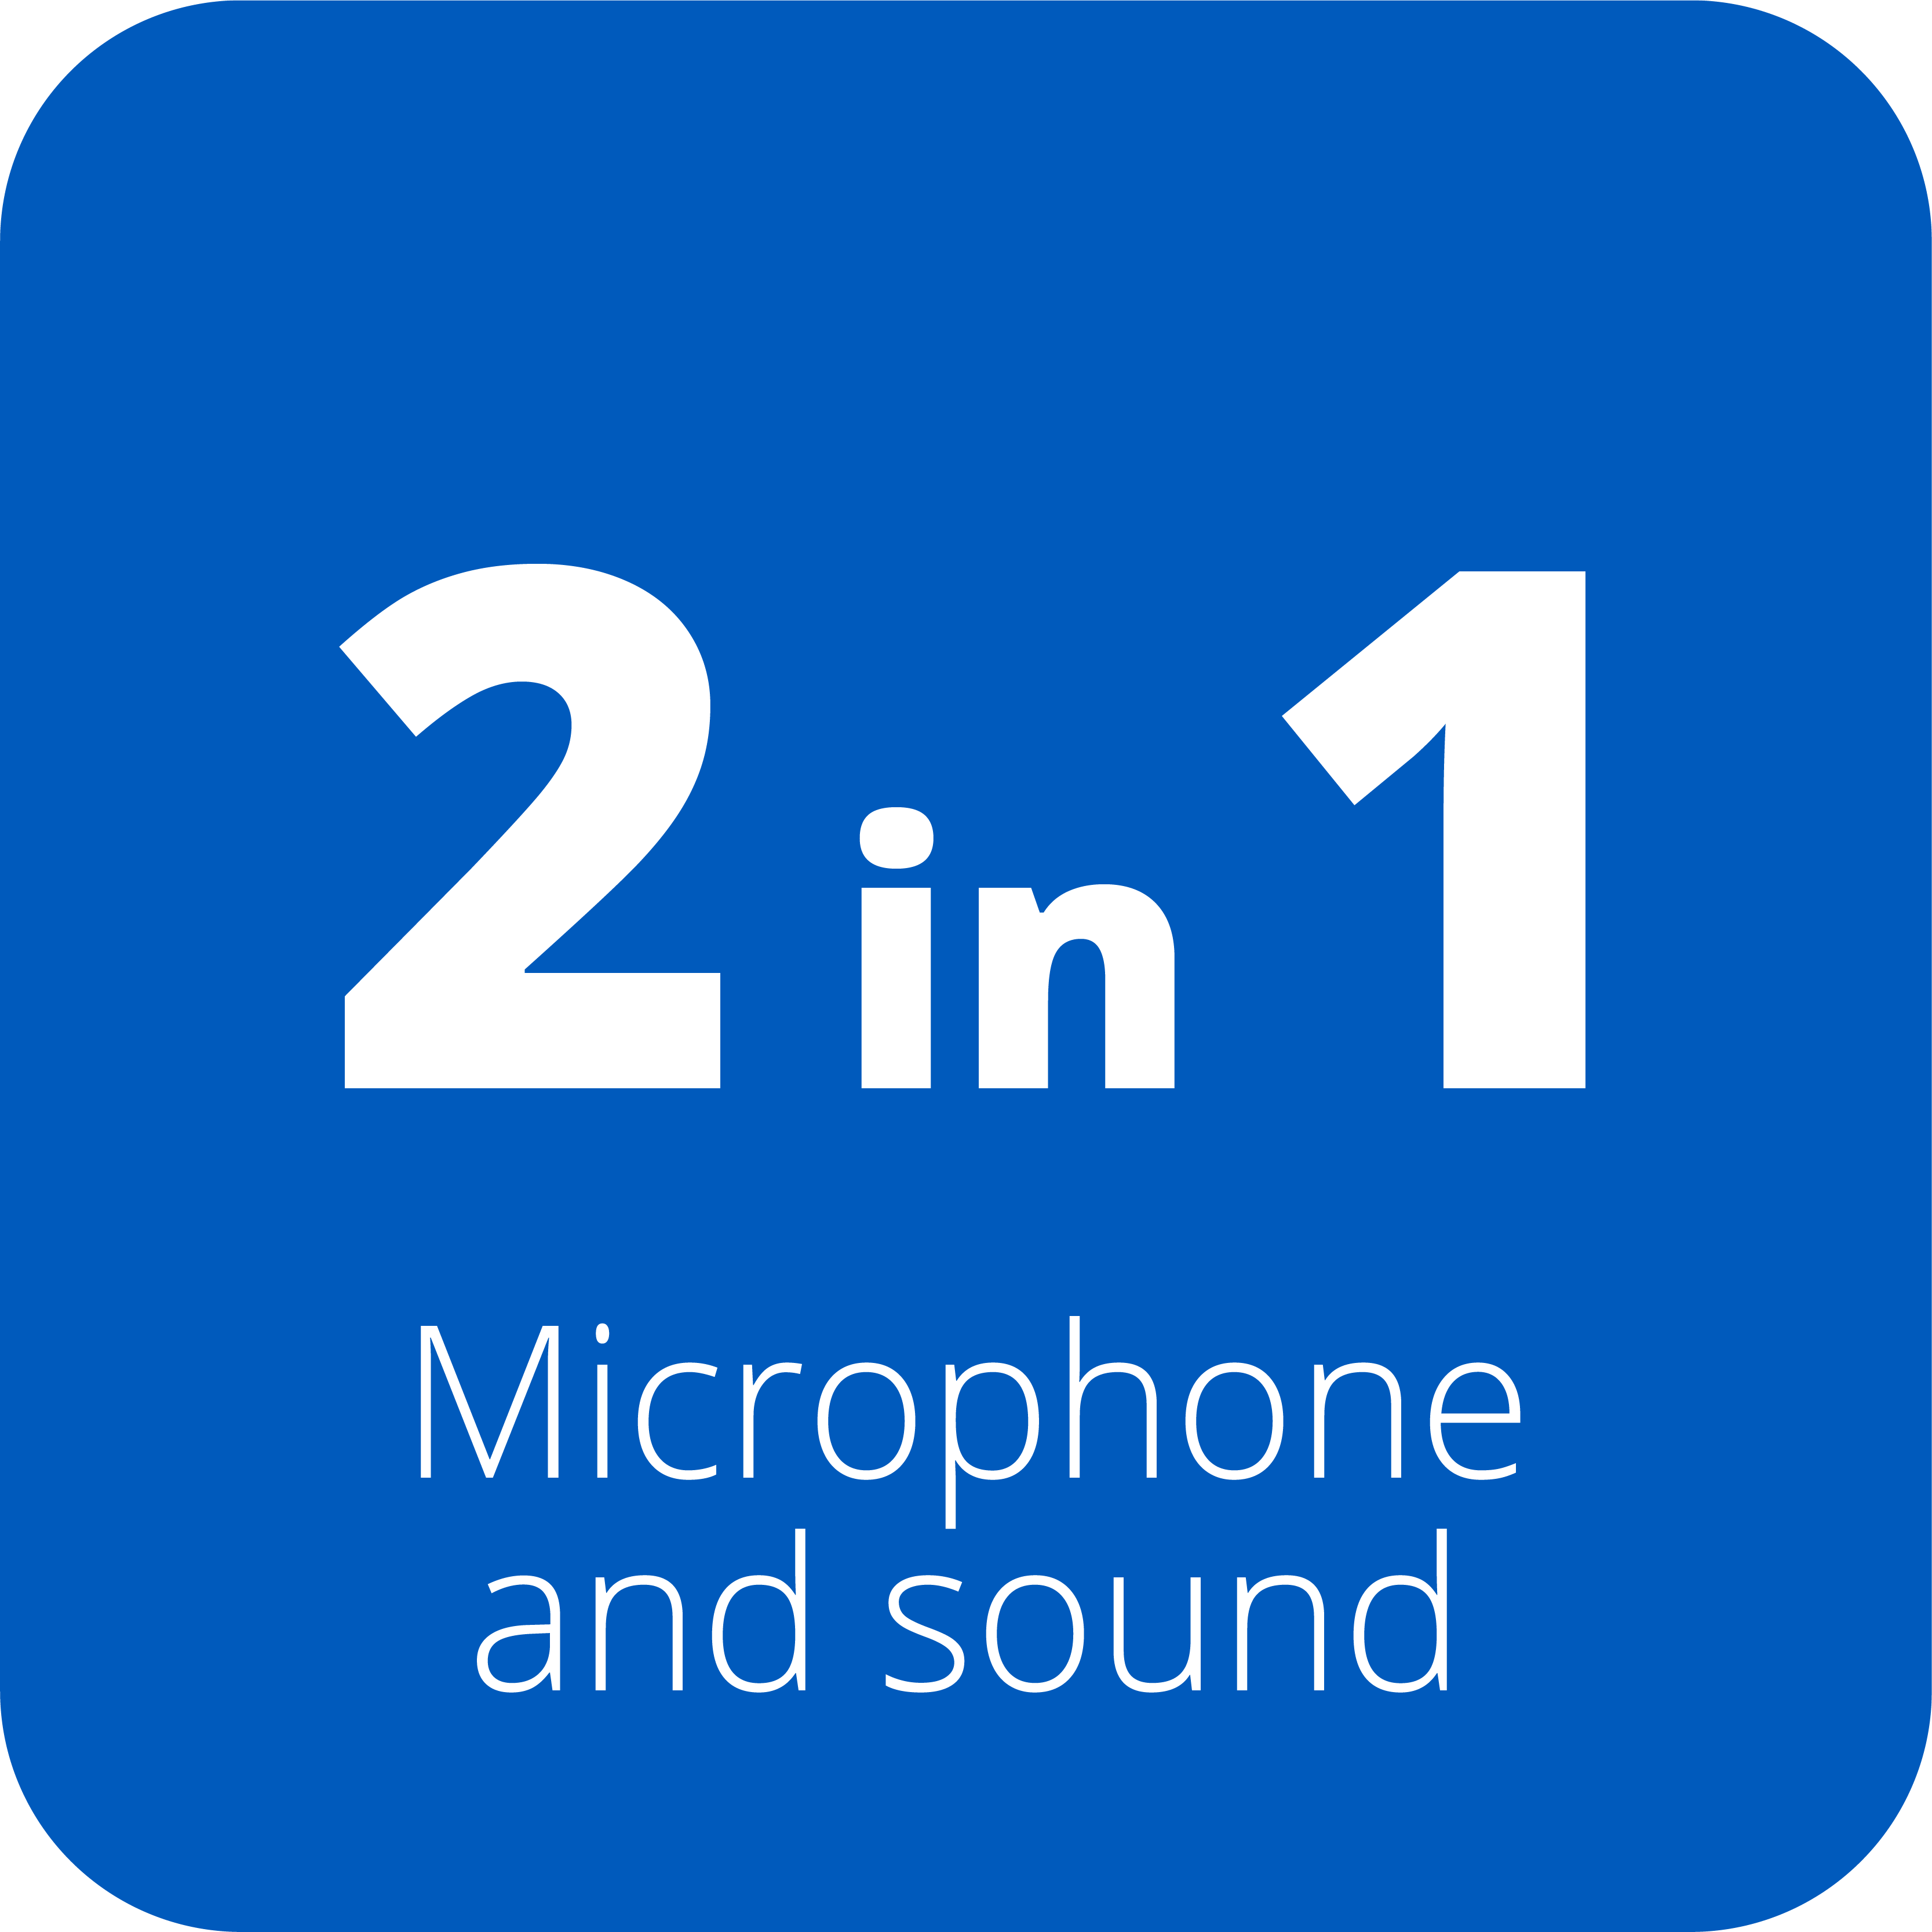 Microphone and sound